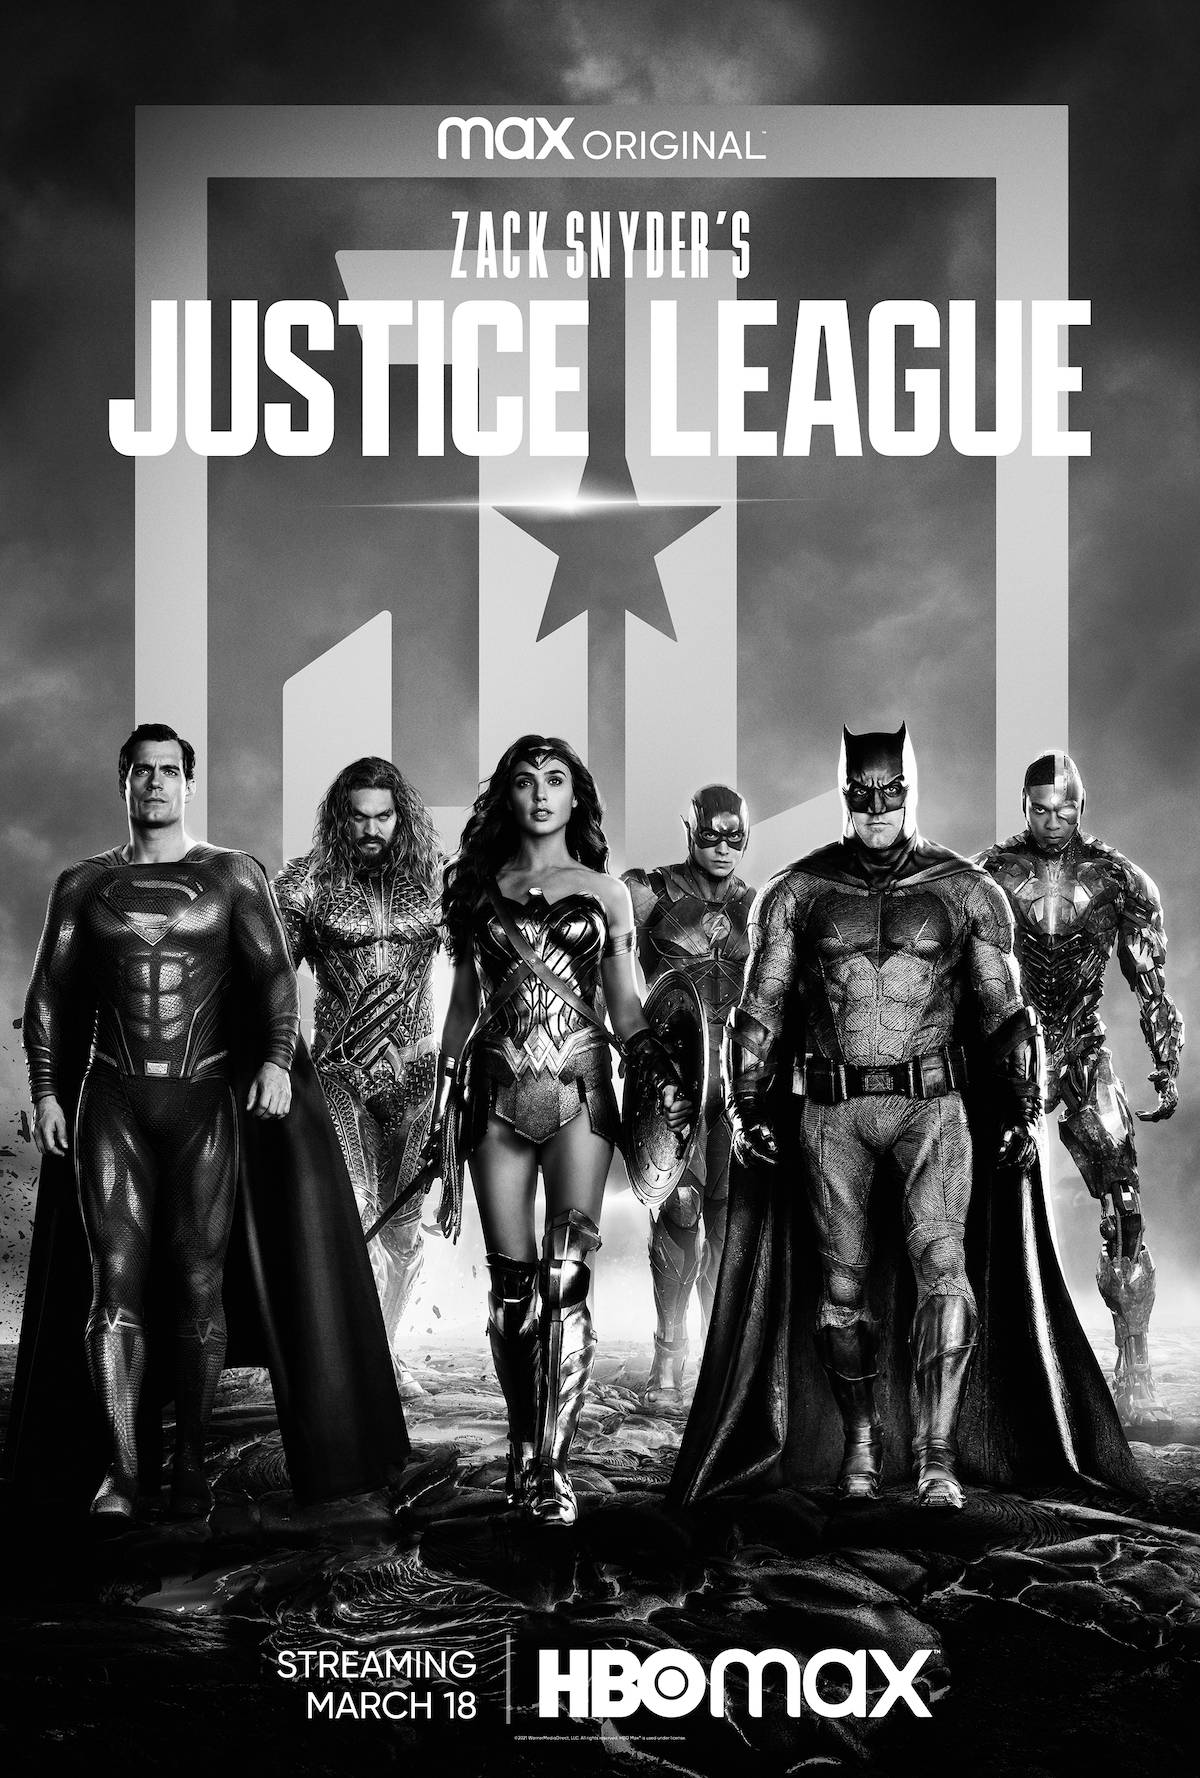 justice-league-poster-new-cast-hbo-max.jpg?q=50&fit=crop&w=1200&dpr=1.5